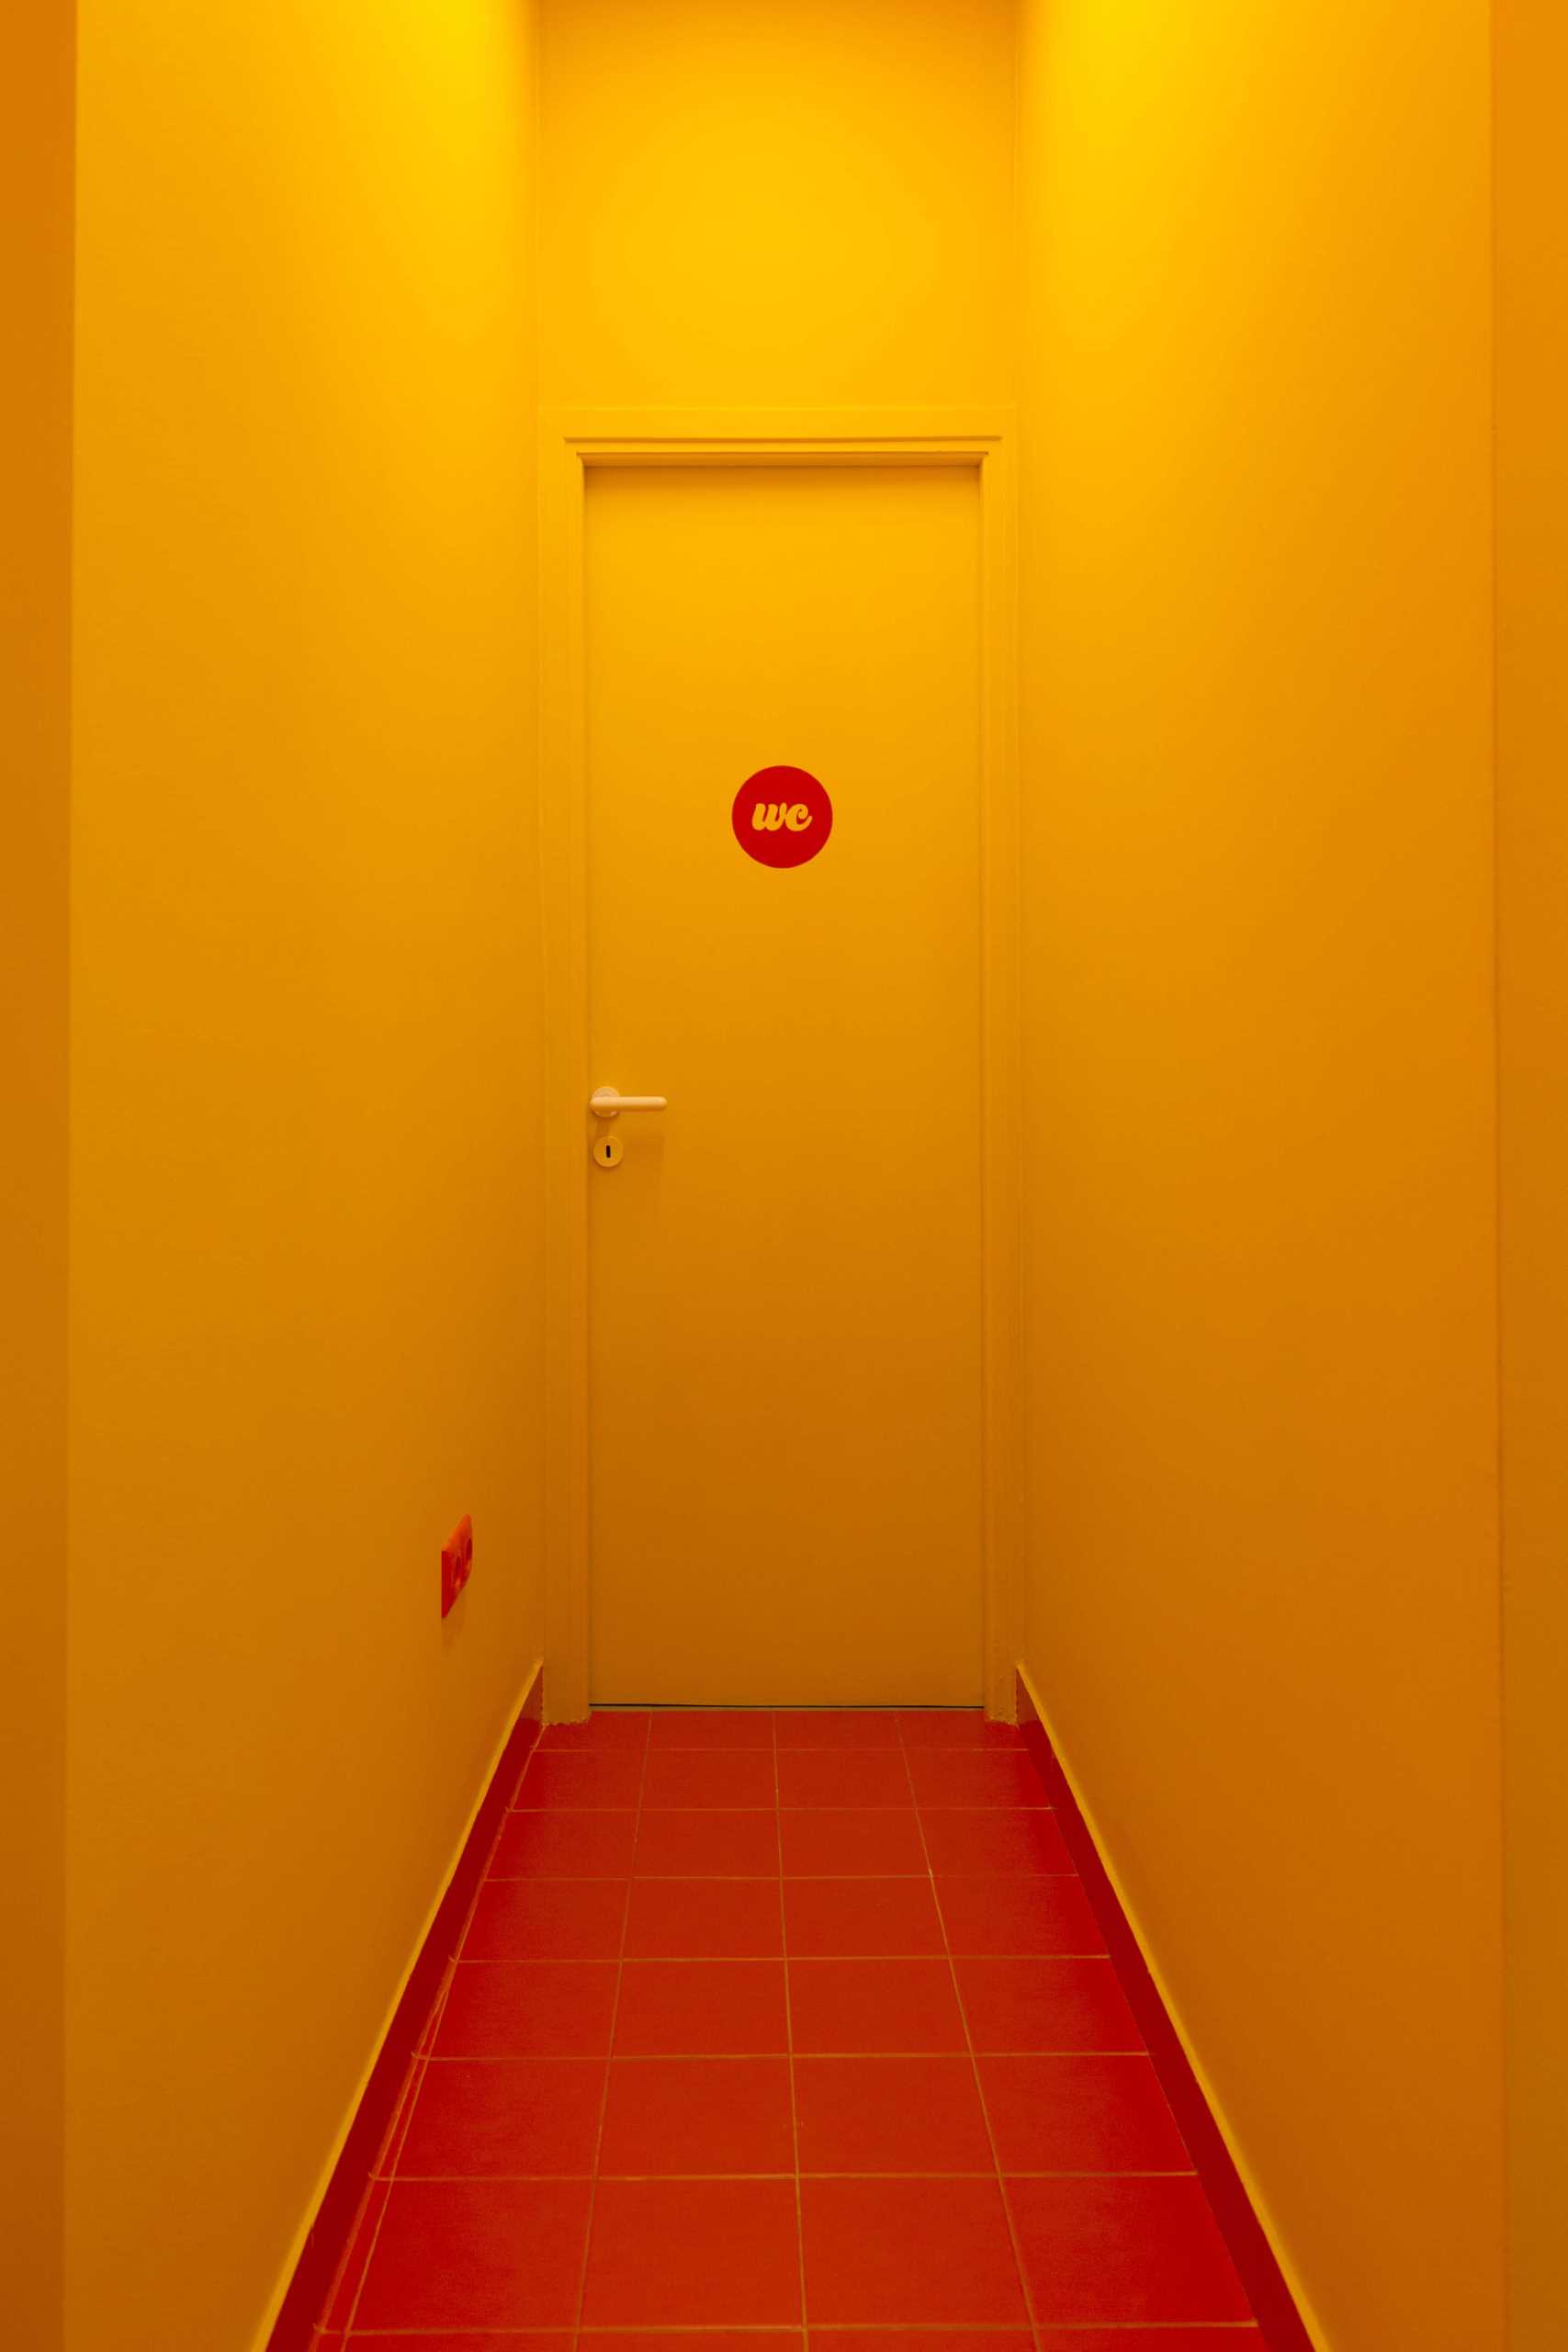 A yellow hallway that leads to the bathroom of a pasta shop.